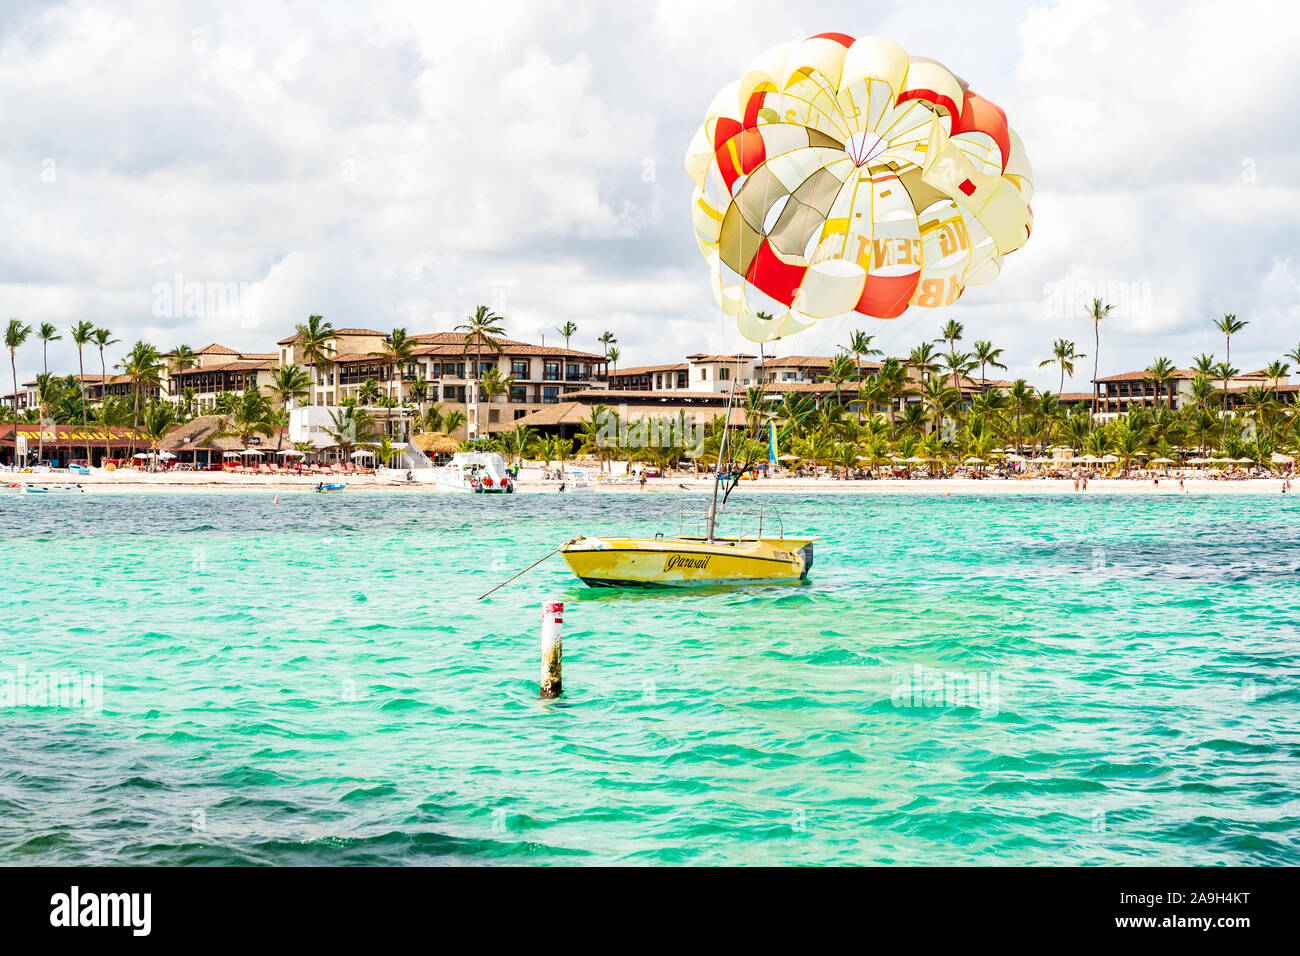 Punta Cana, Dominican Republic - October 25, 2019: Relaxing Turquoise Waters of Dominican Republic with Water Sports and a Beautiful Beach. Stock Photo